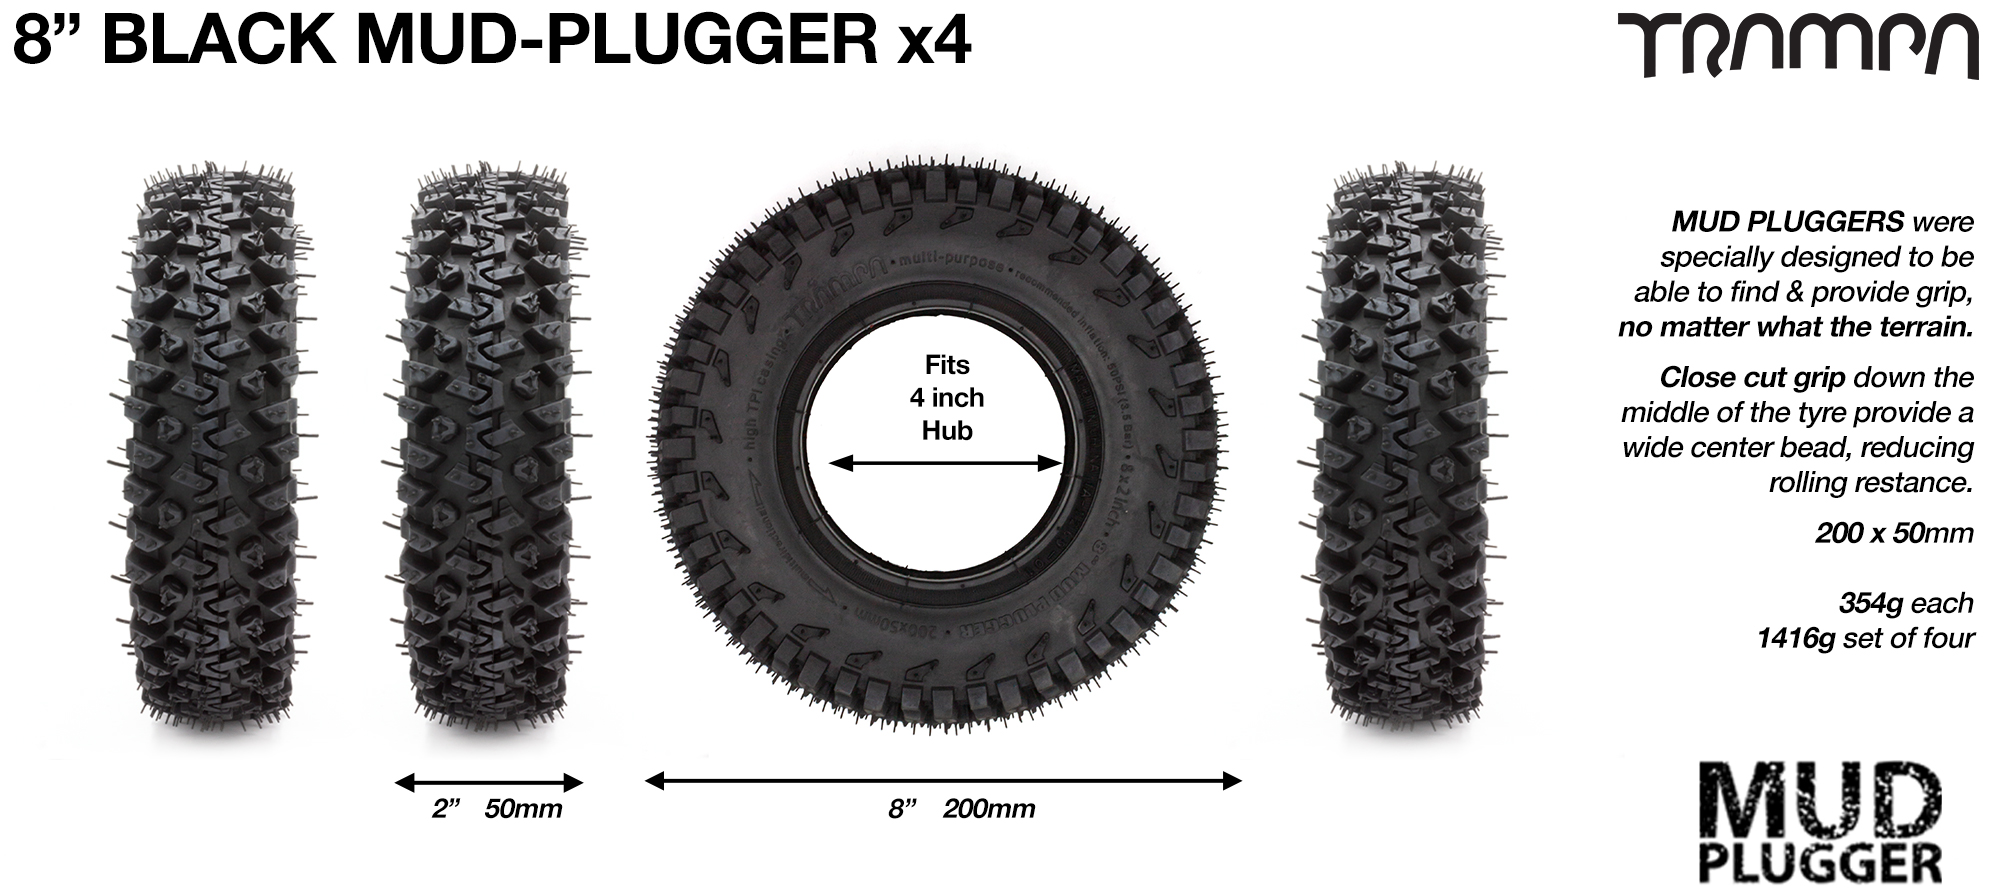 TRAMPA MUD-PLUGGER 8 Inch Tyre measure 3.75x 2x 8 Inch or 200x50mm with 3.75 Inch Rim fits all 4 Inch Hubs - Set of 4